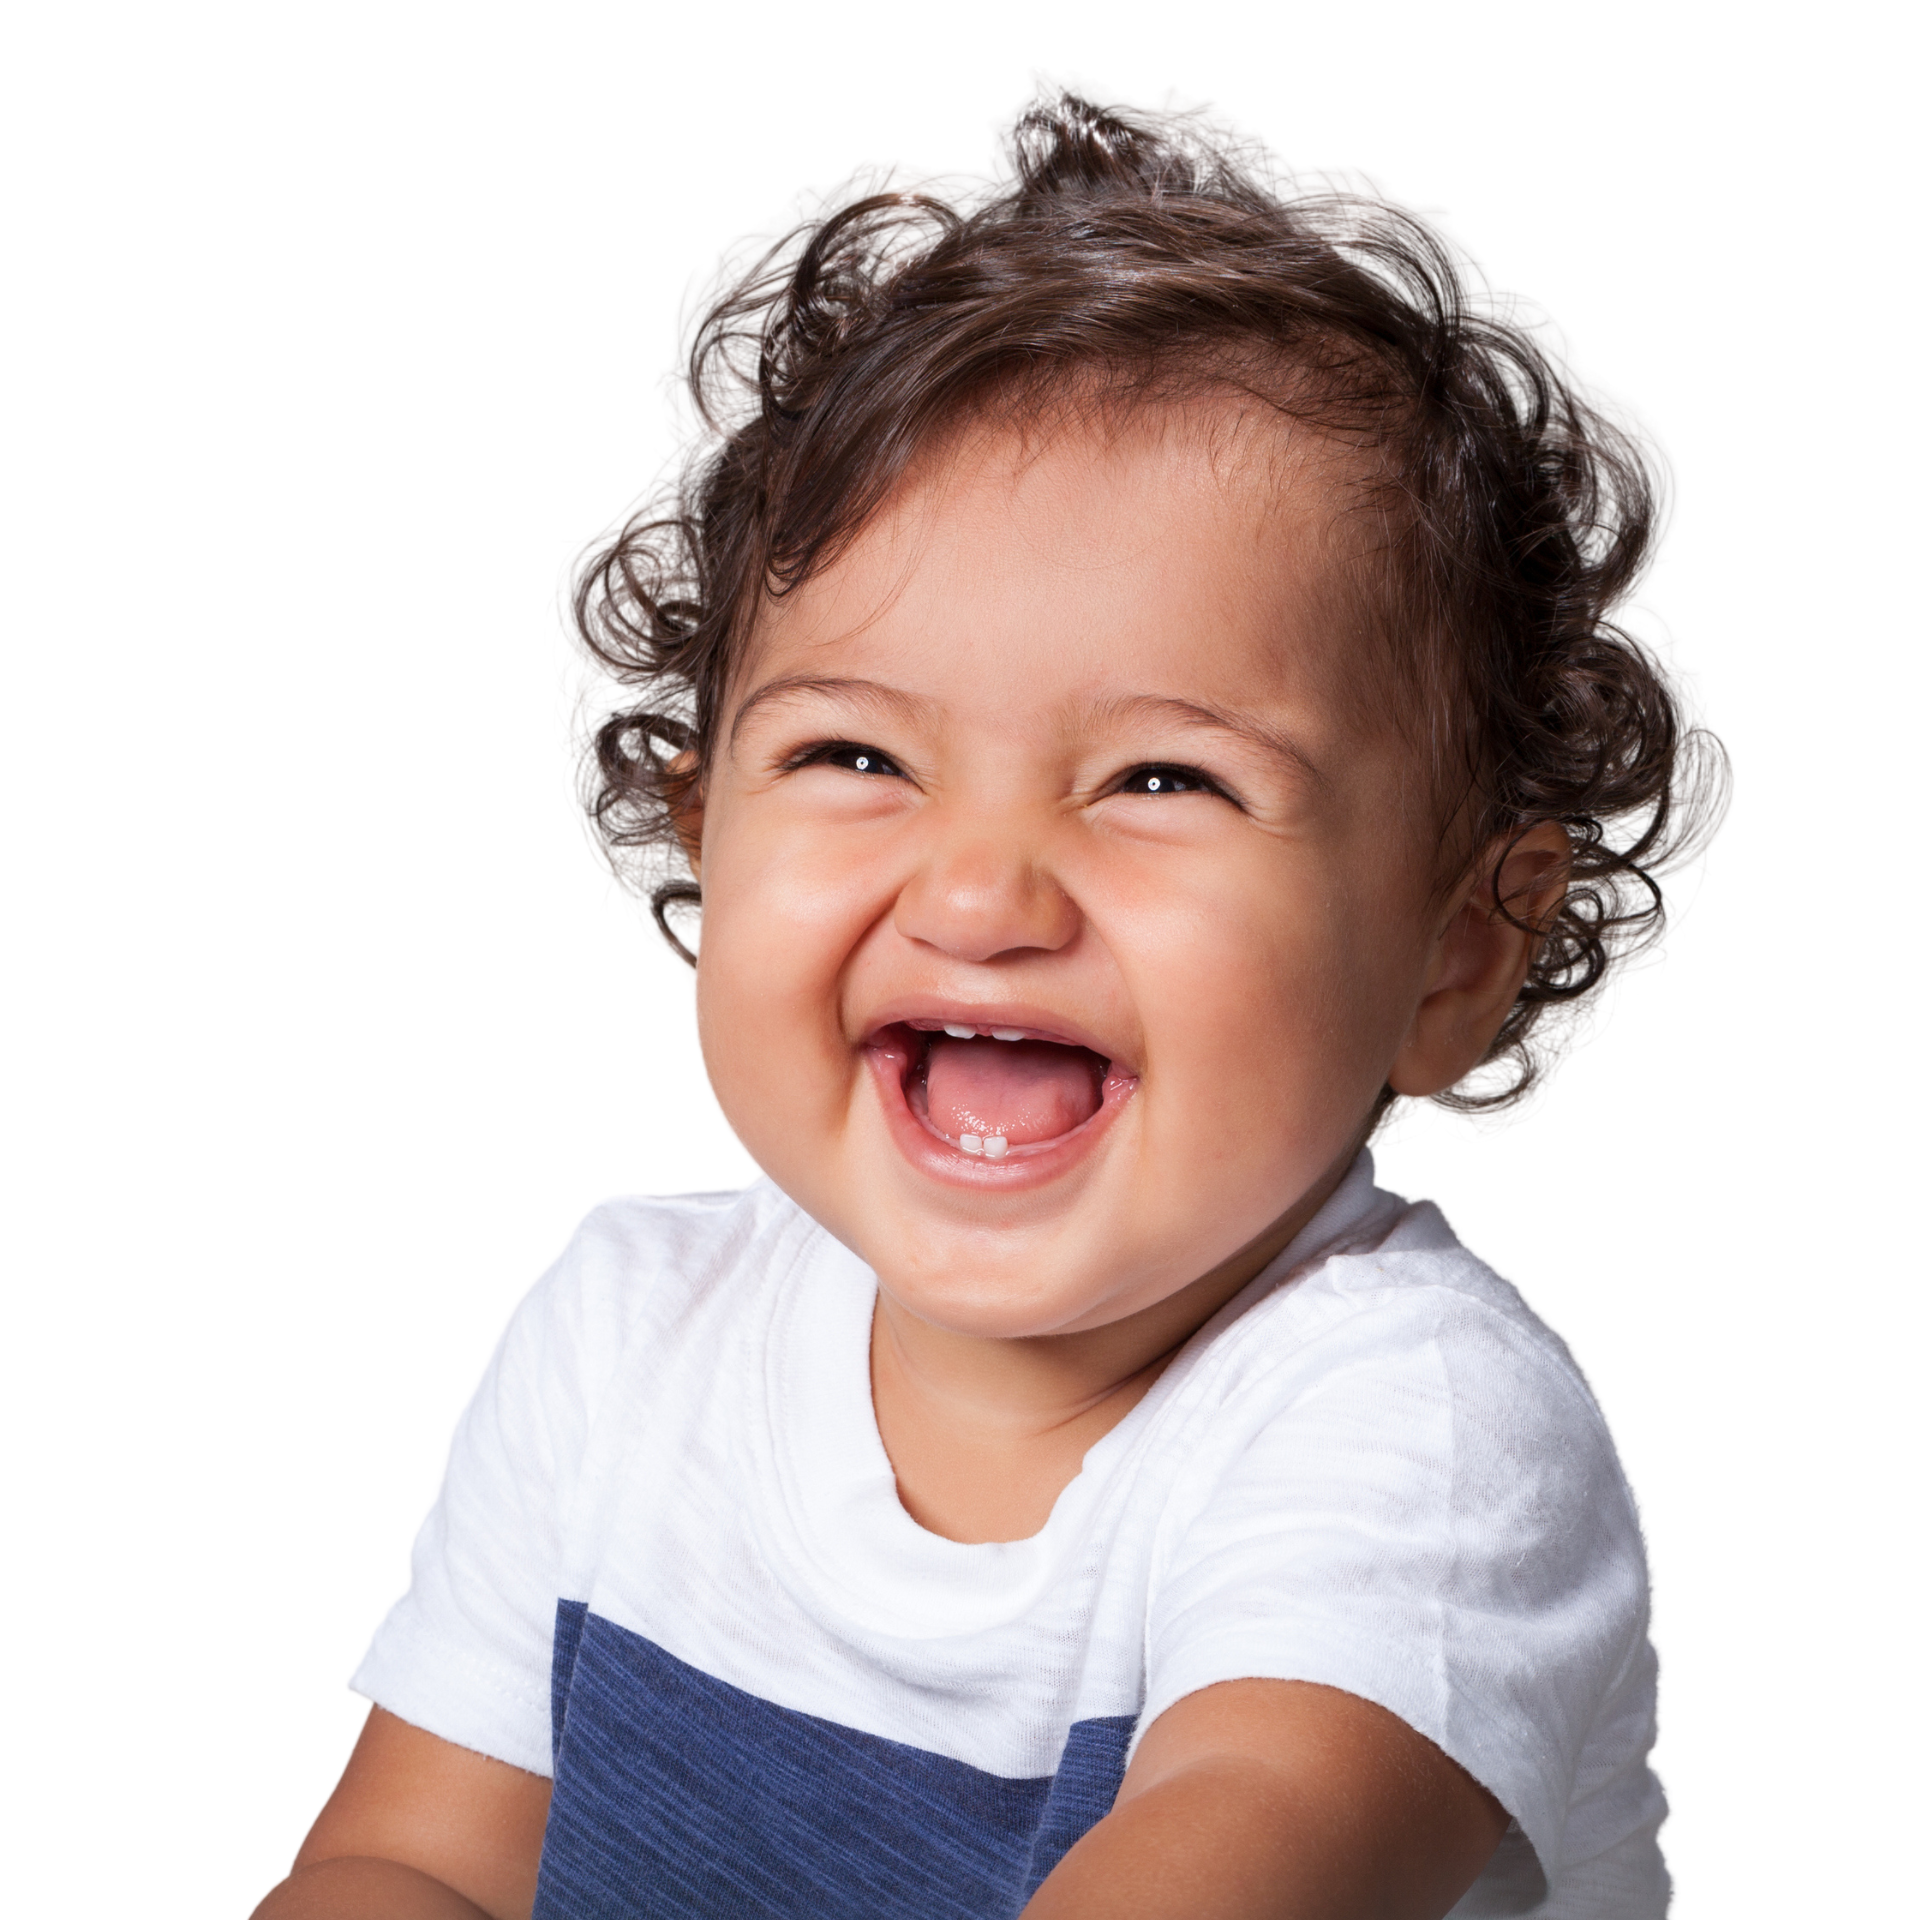 A close up of a laughing toddler with curly hair